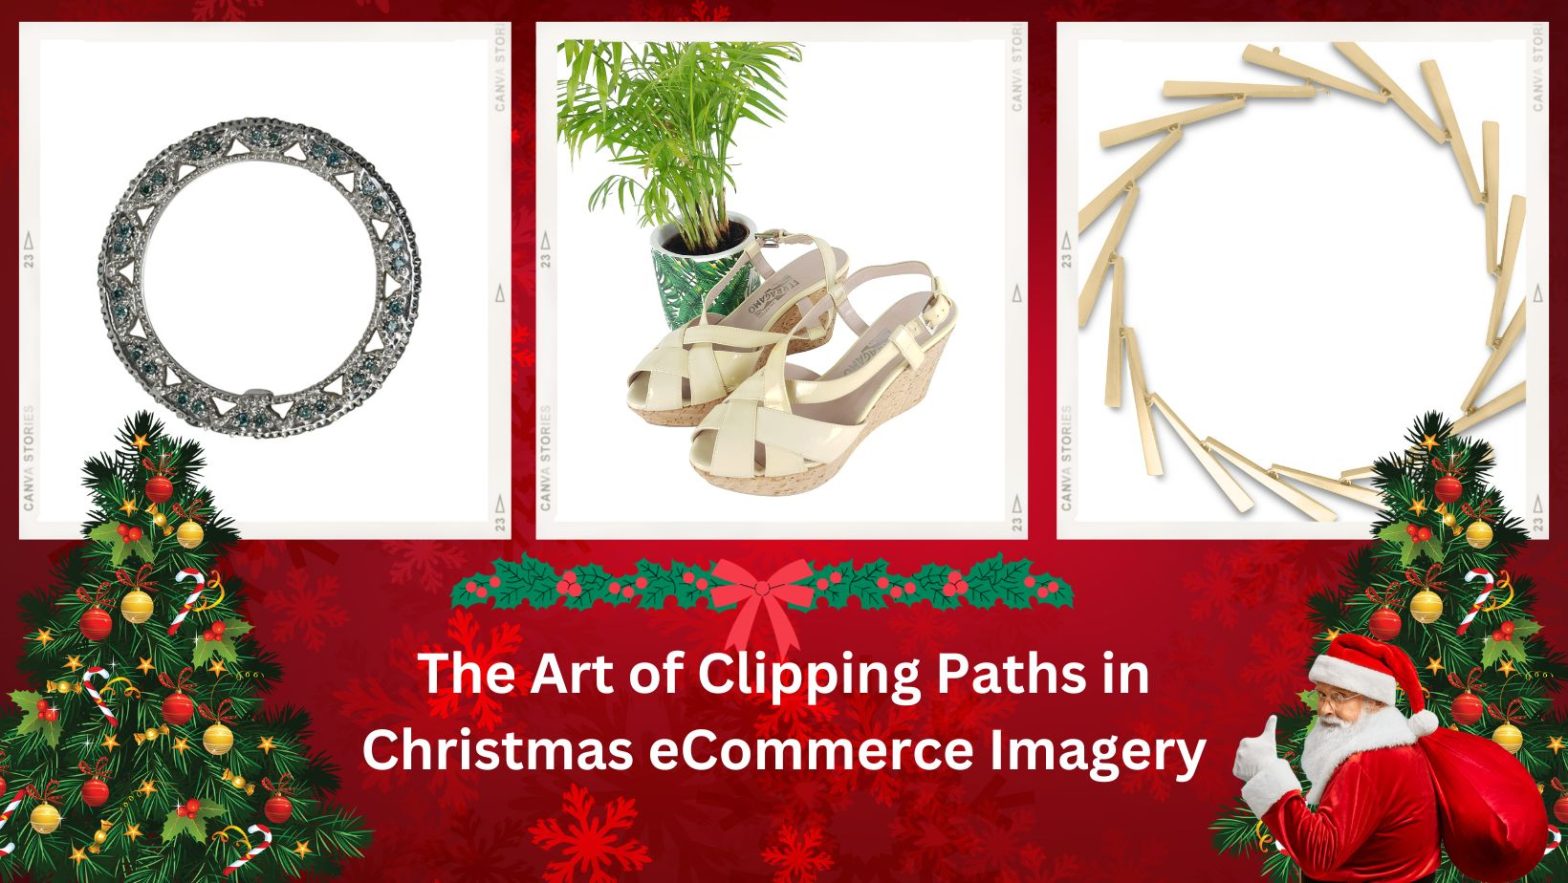 Image Clipping Path Service